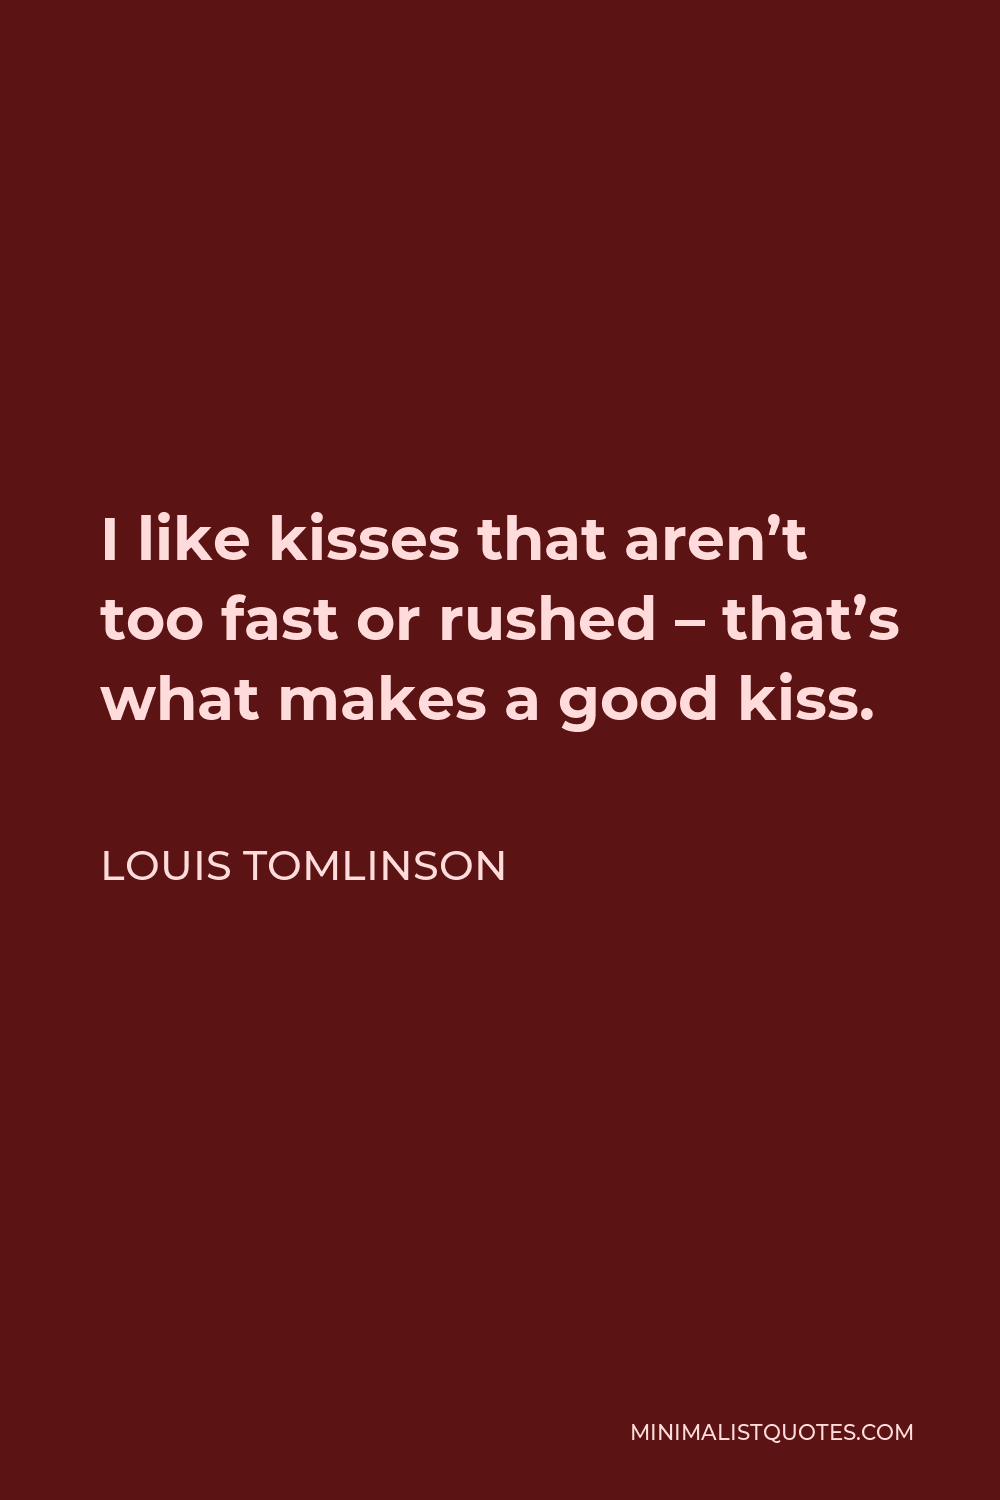 Louis Tomlinson Quote - I like kisses that aren’t too fast or rushed – that’s what makes a good kiss.